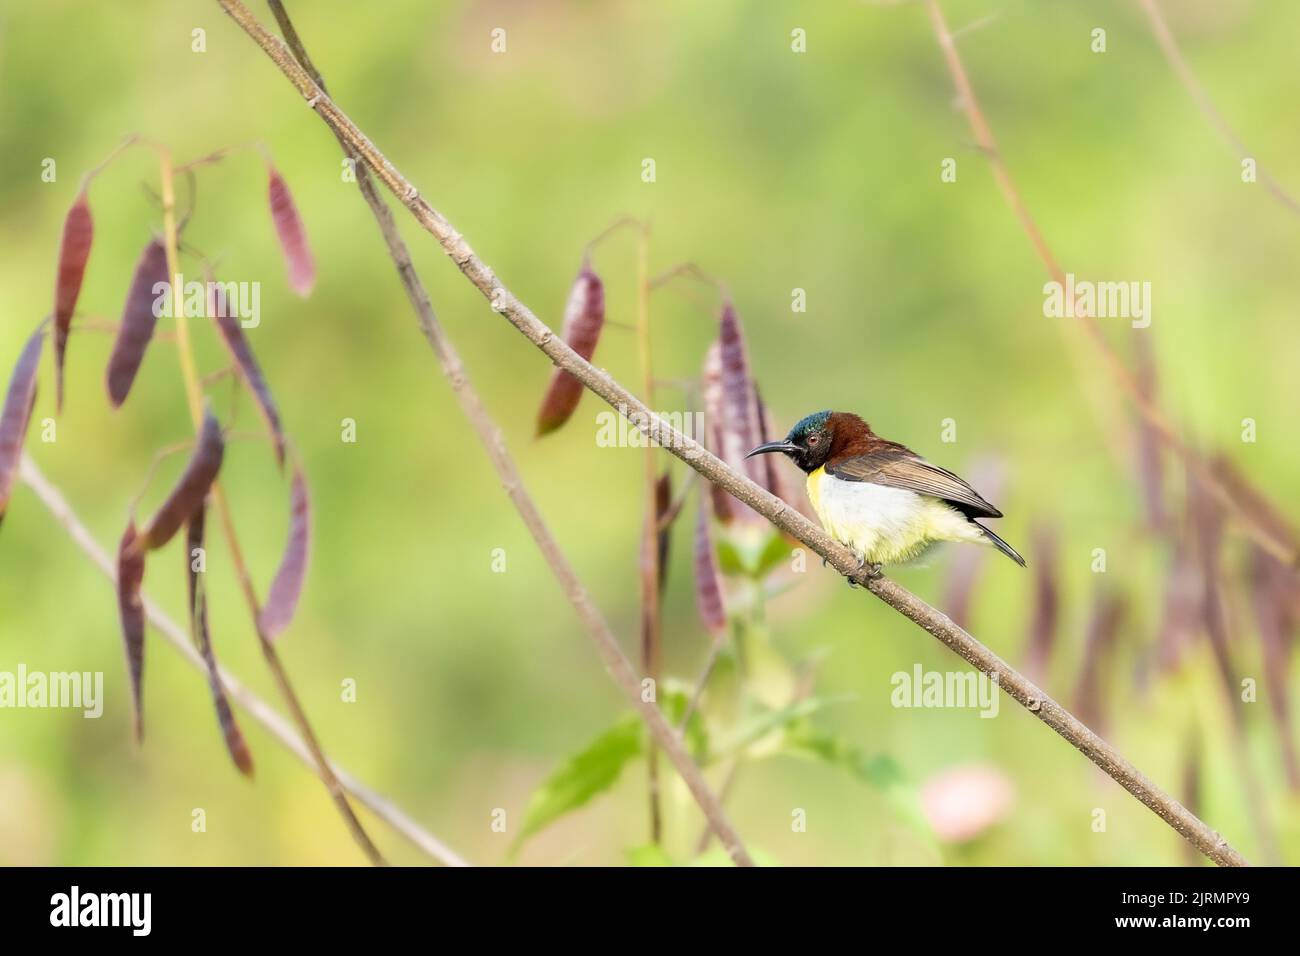 A side view of purple-rumped sunbird perched on a branch Stock Photo